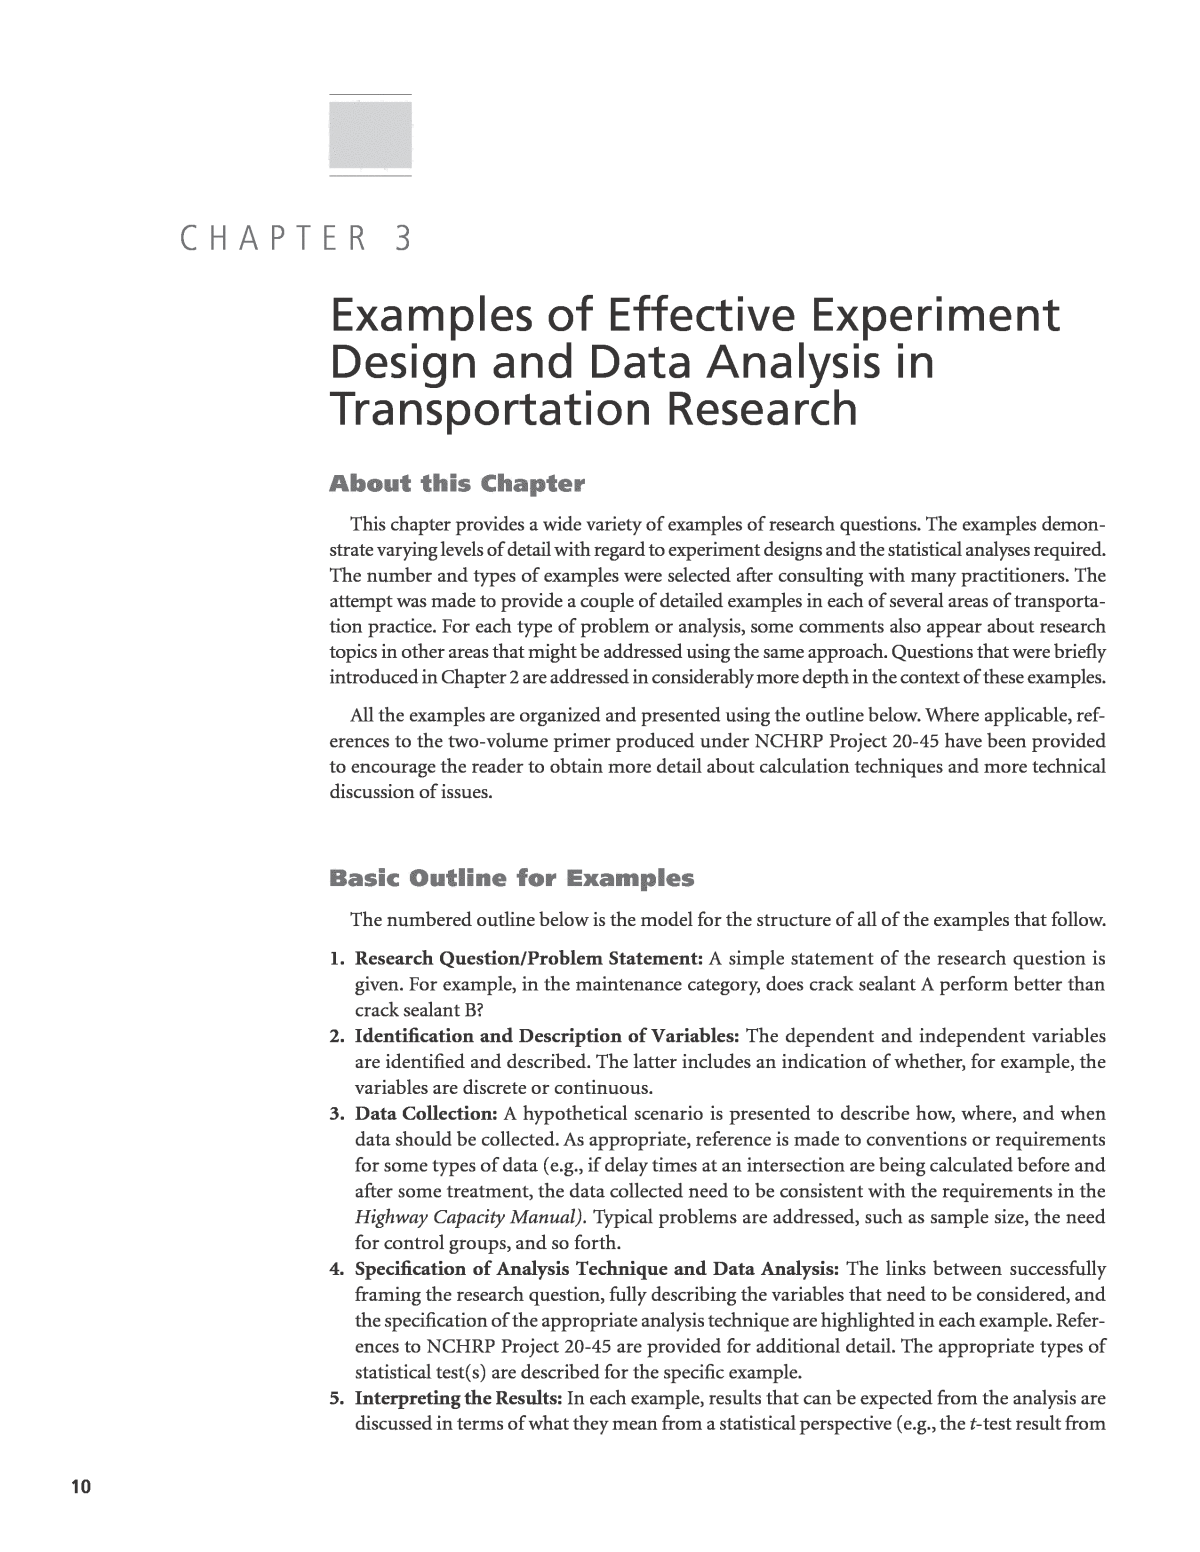 Reading: Effective Experiment Design and Data Analysis in